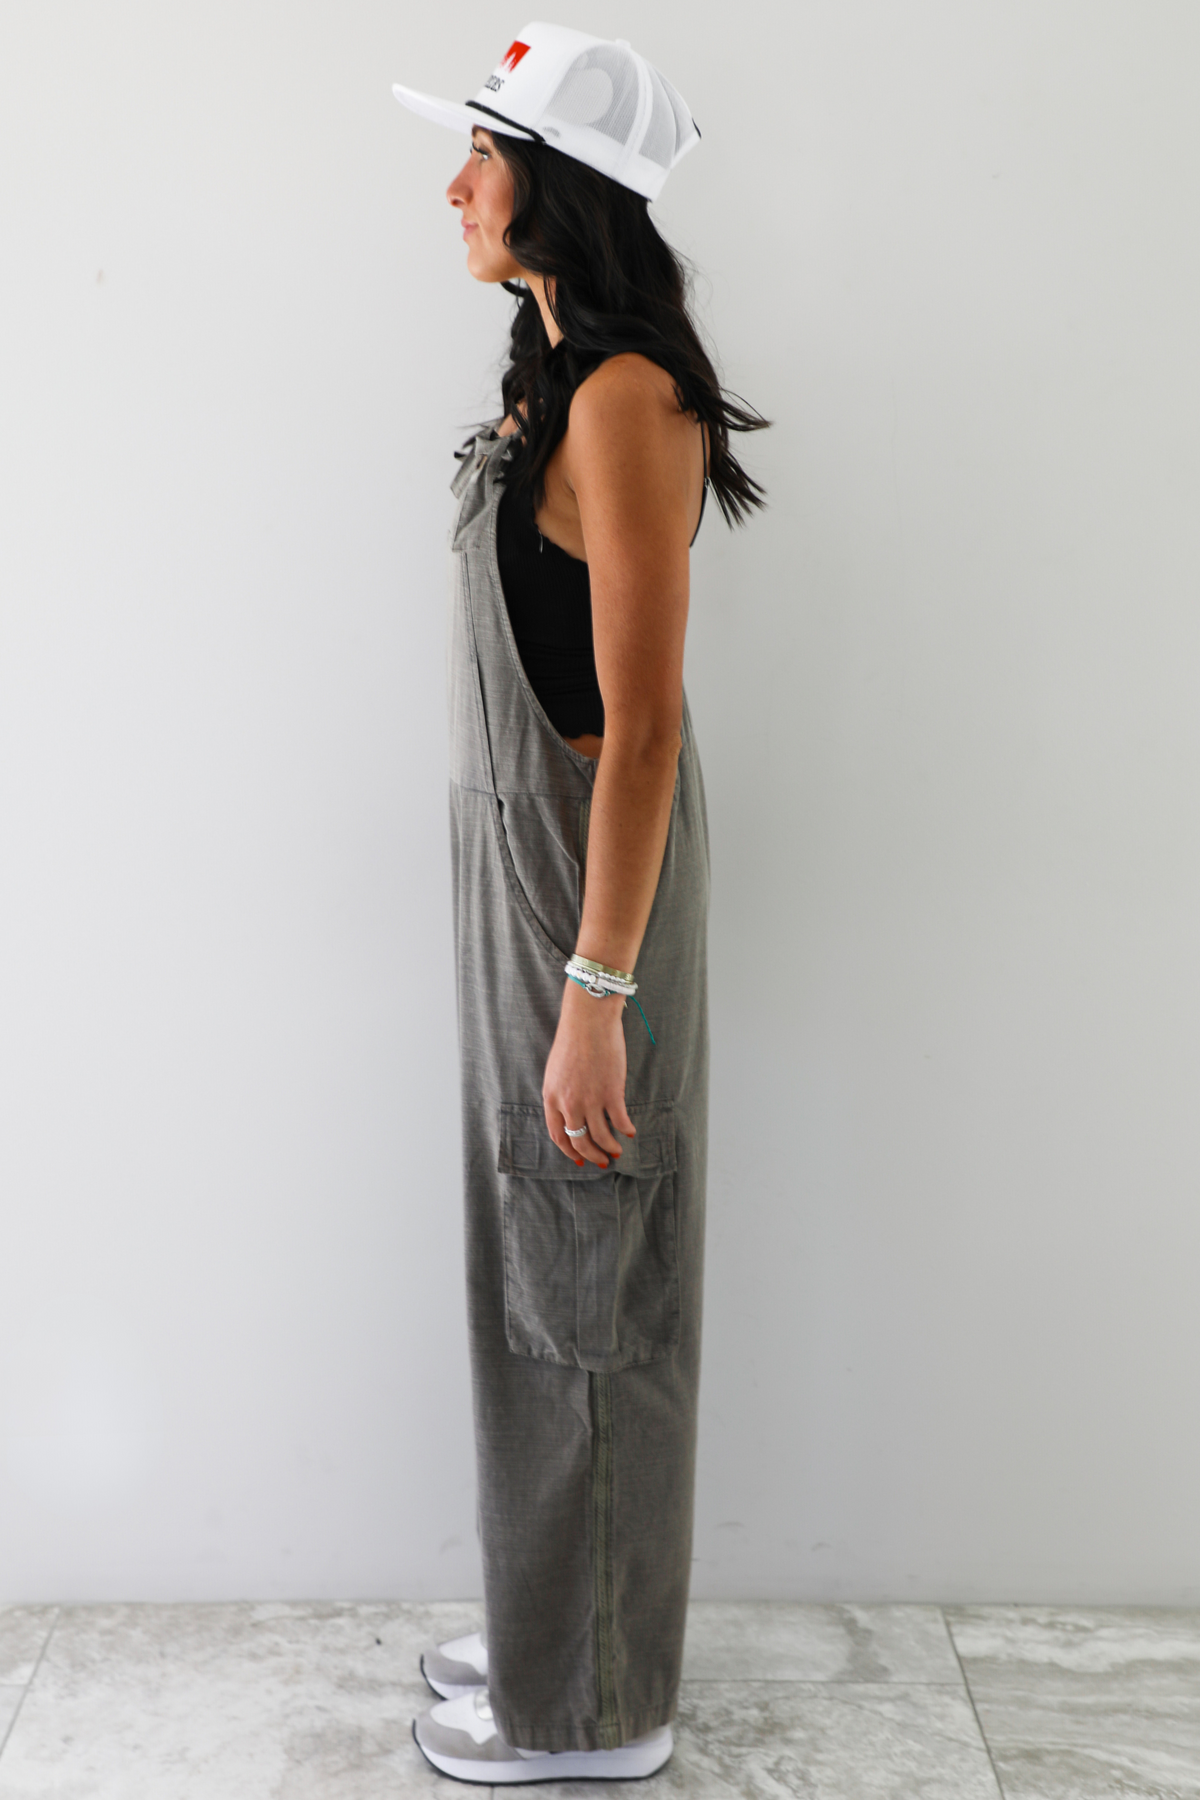 Keep It Moving Cargo Overalls: Charcoal